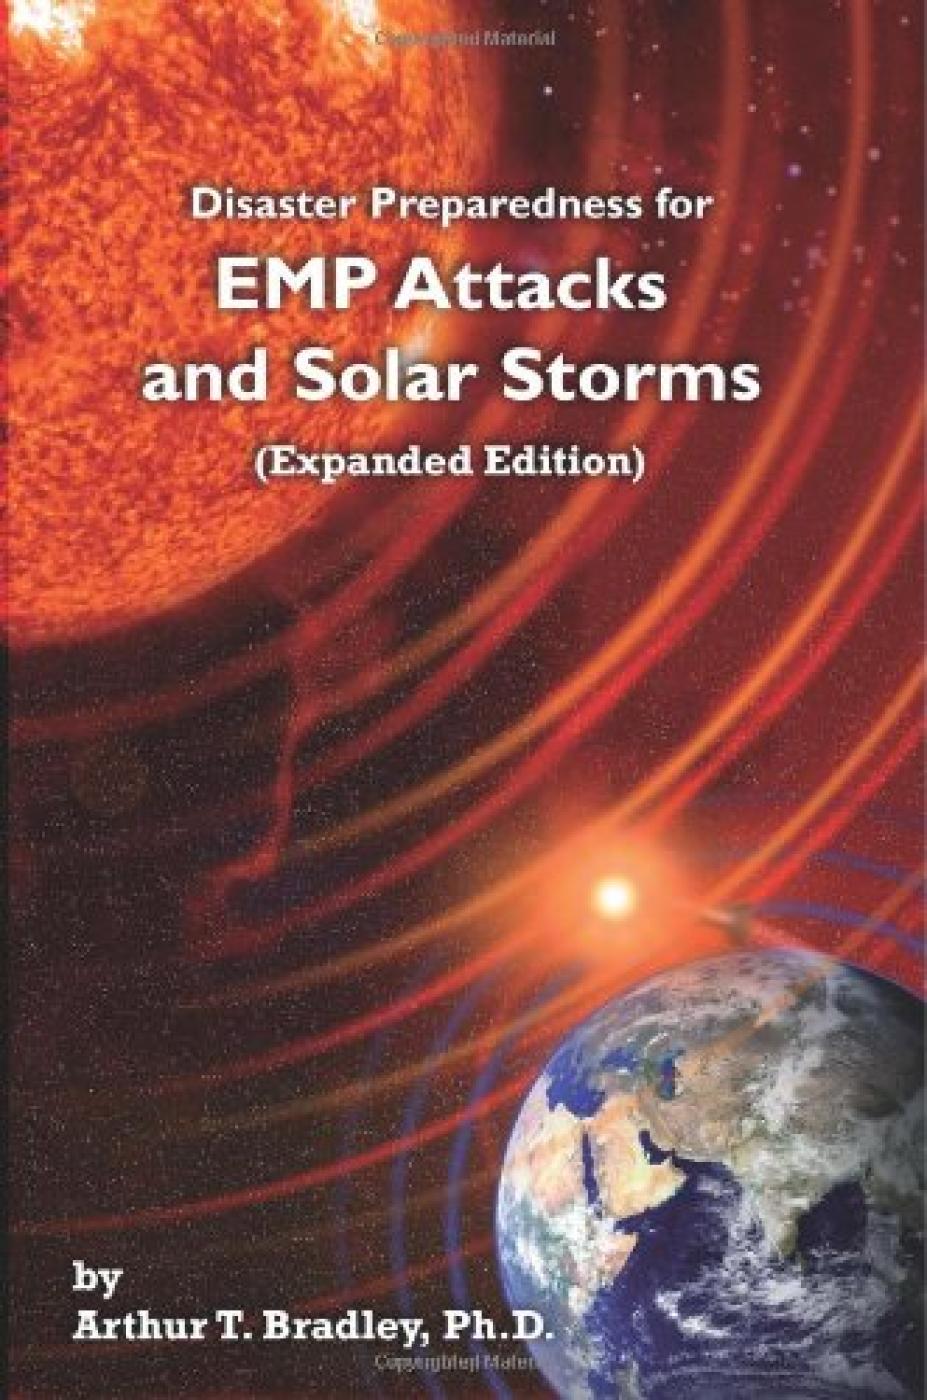 Disaster Preparedness for EMP Attacks and Solar Storms (Expanded Edition)